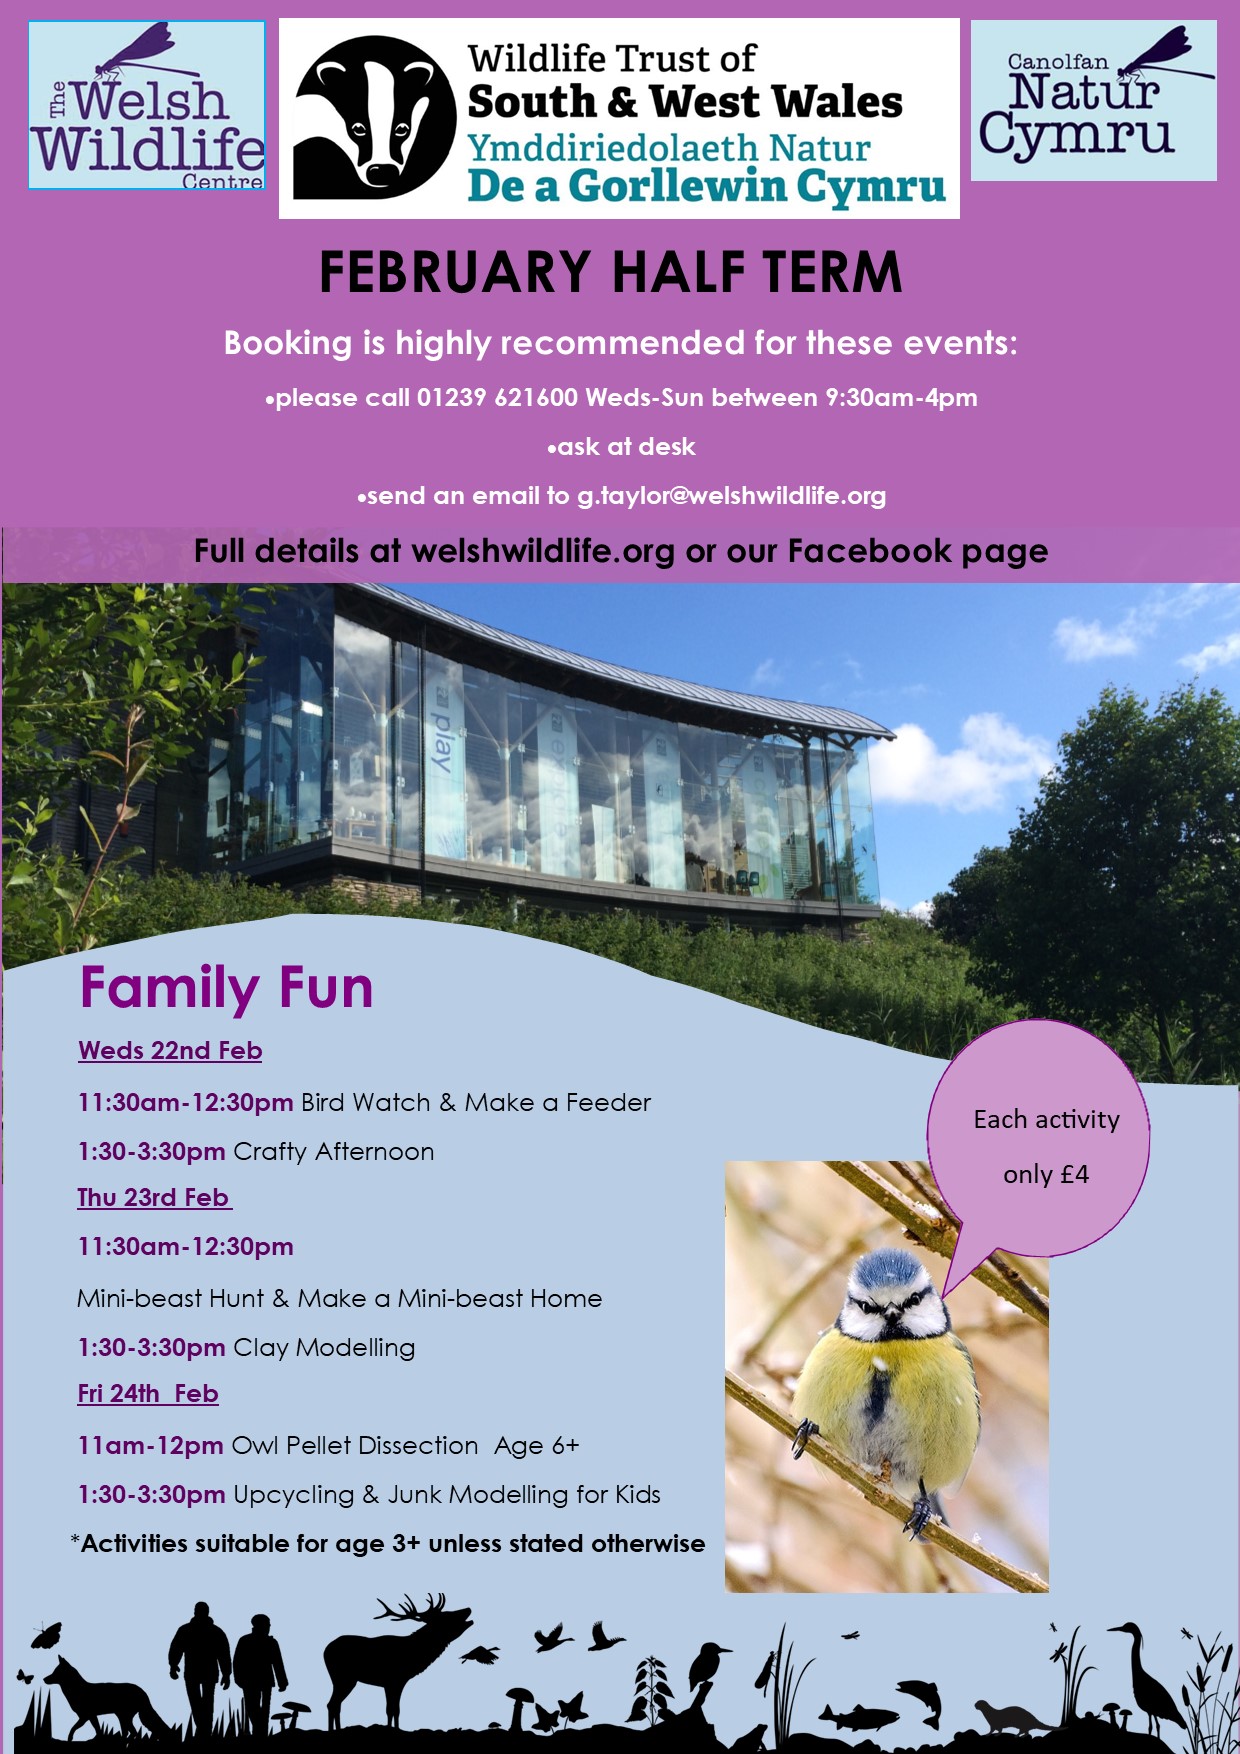 Half Term at the Welsh Wildlife Centre